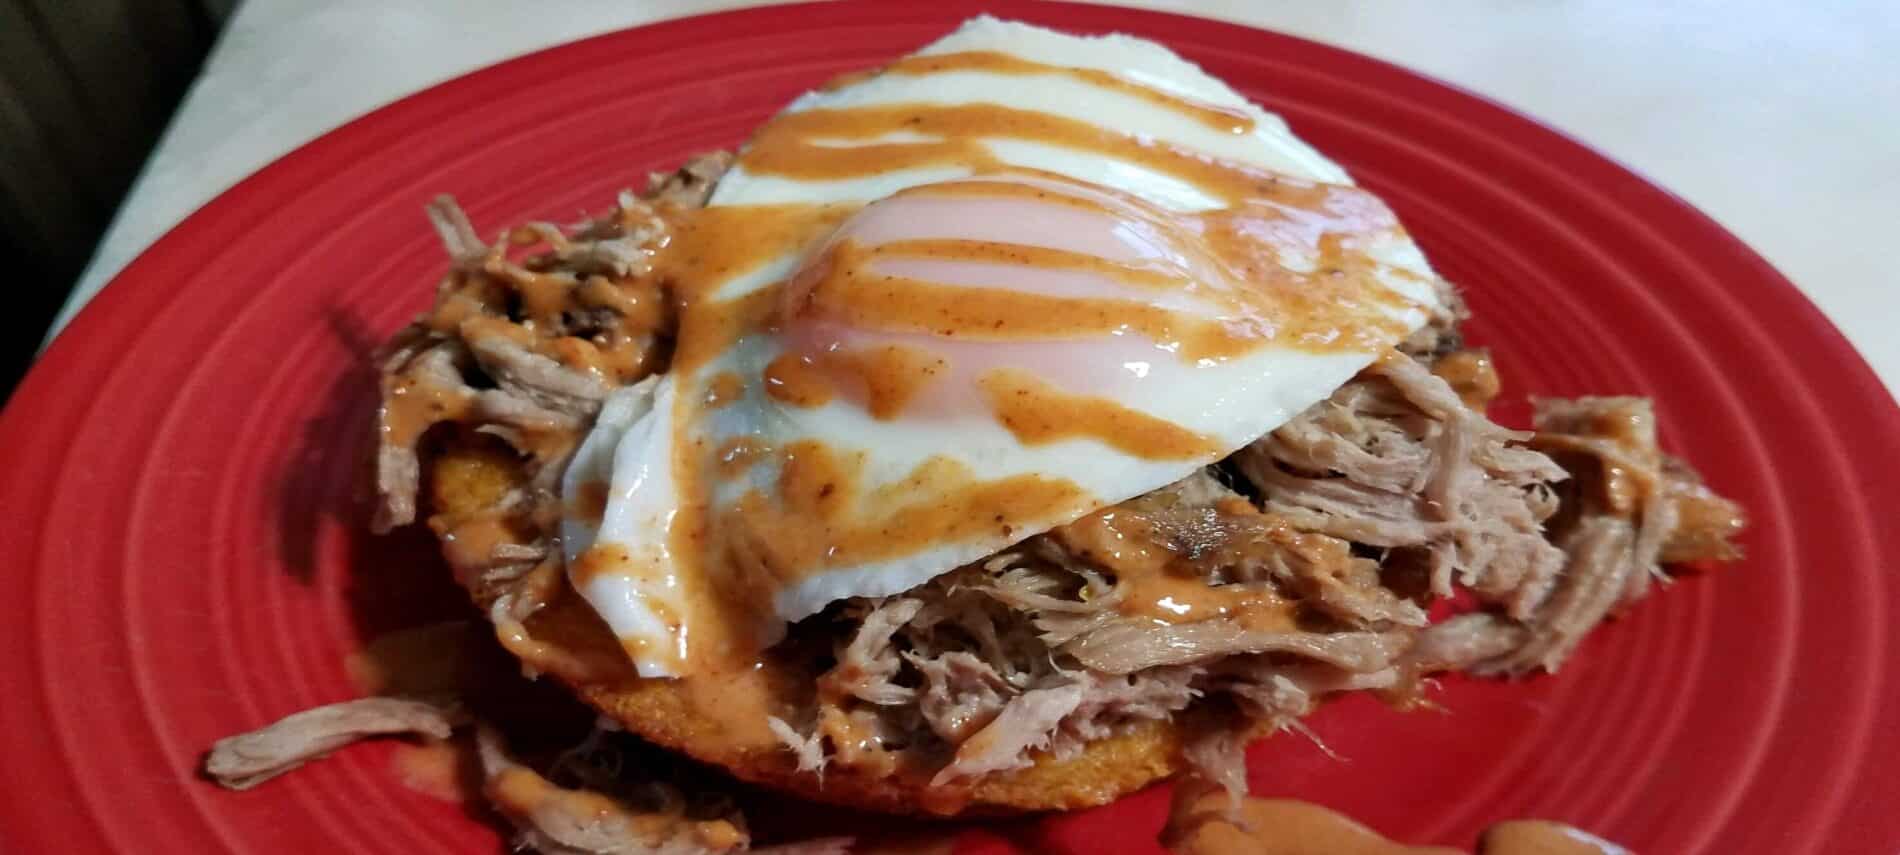 crispy cornbread covered with pulled pork, topped with over easy egg, drizzled with a light red sauce on a red plate